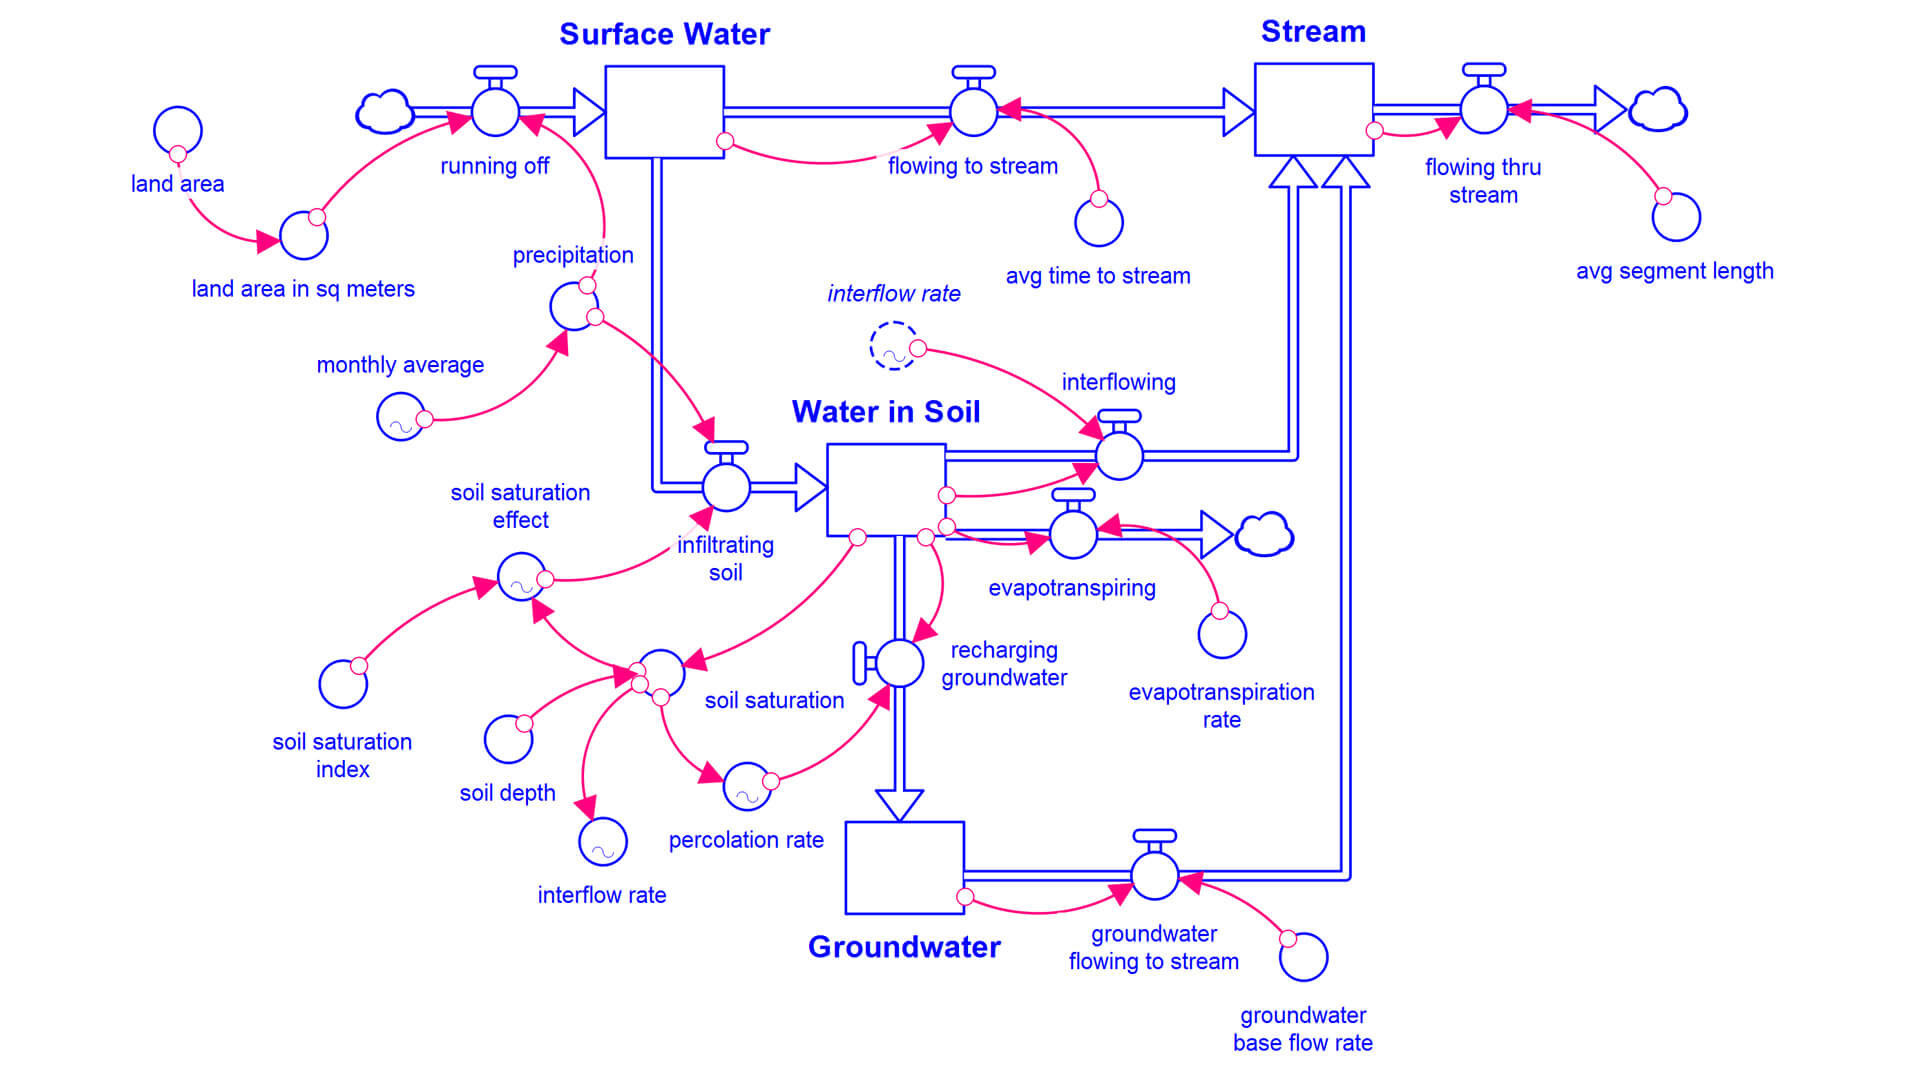 Systems in Focus: Water model